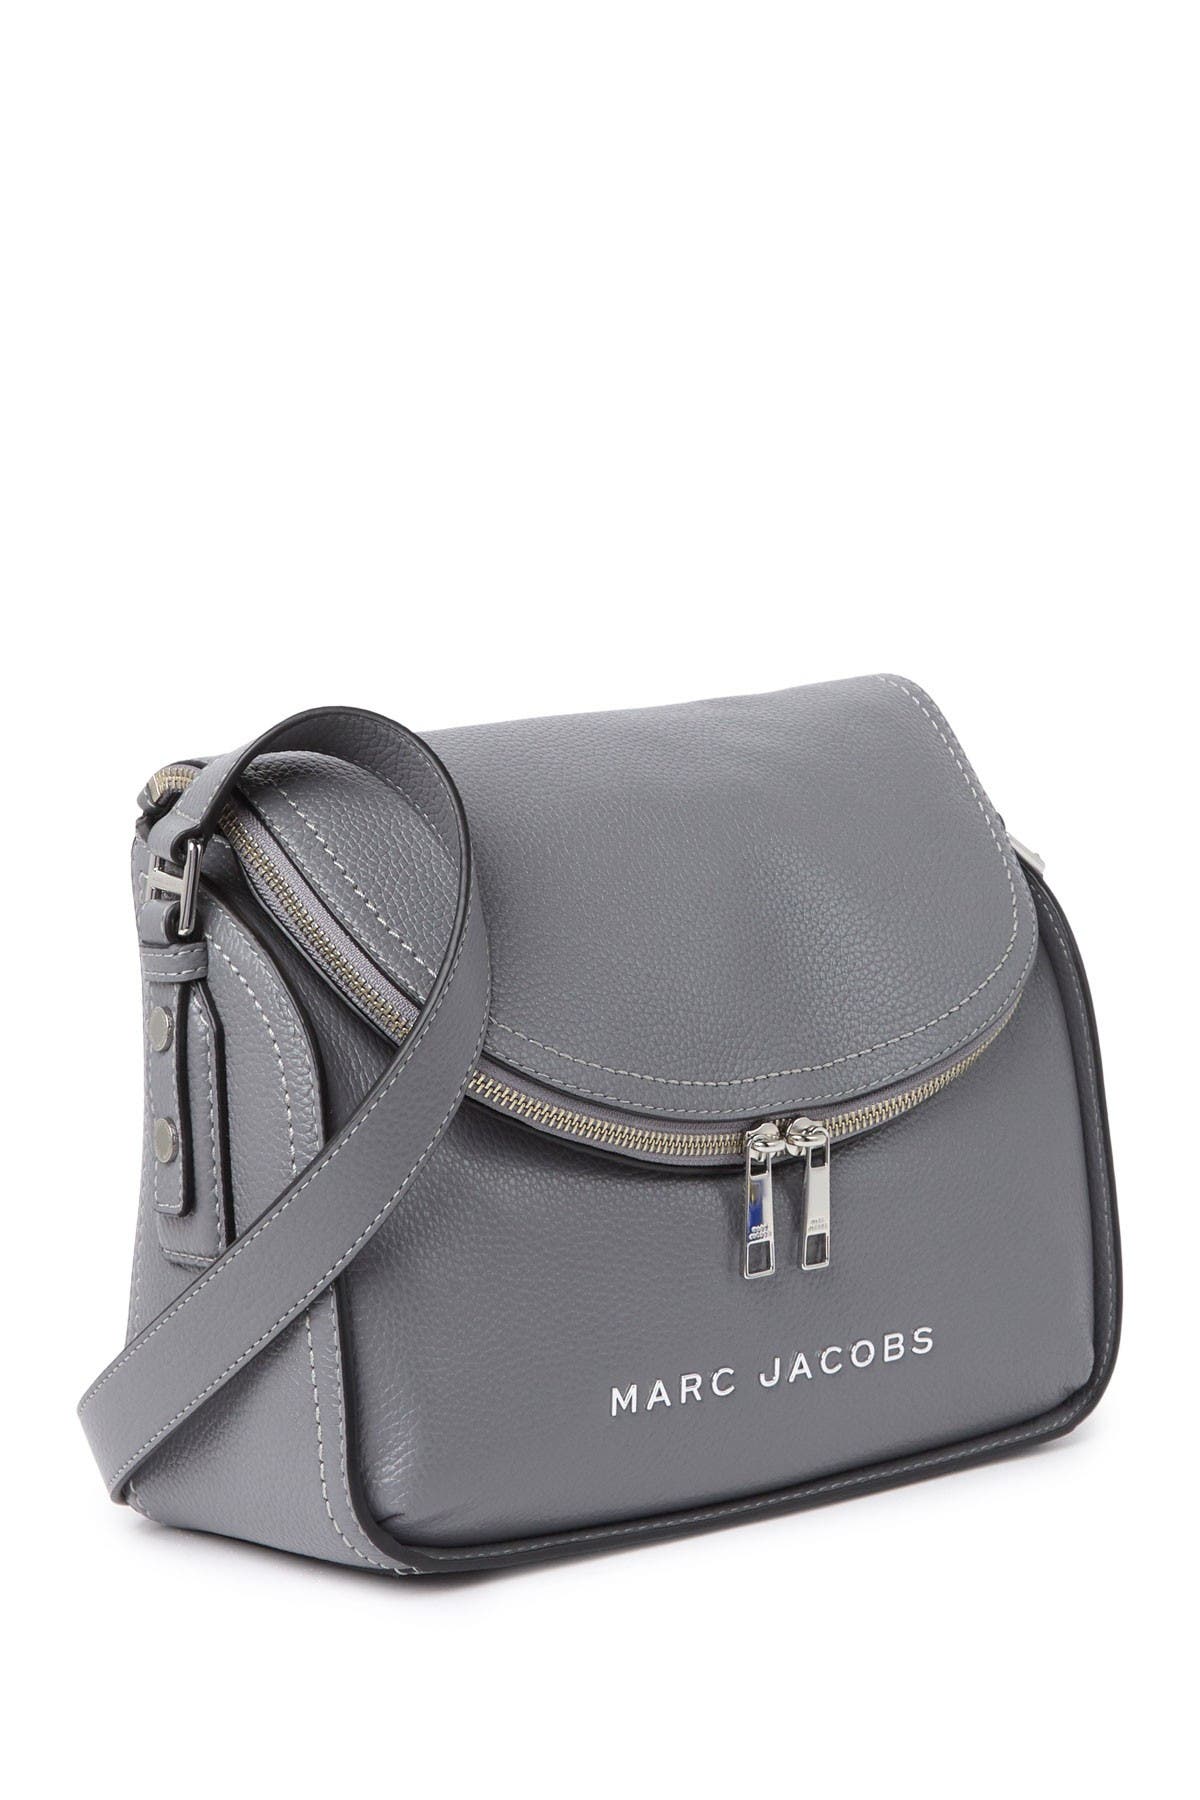 Marc Jacobs | The Groove Leather Messenger Bag | HauteLook